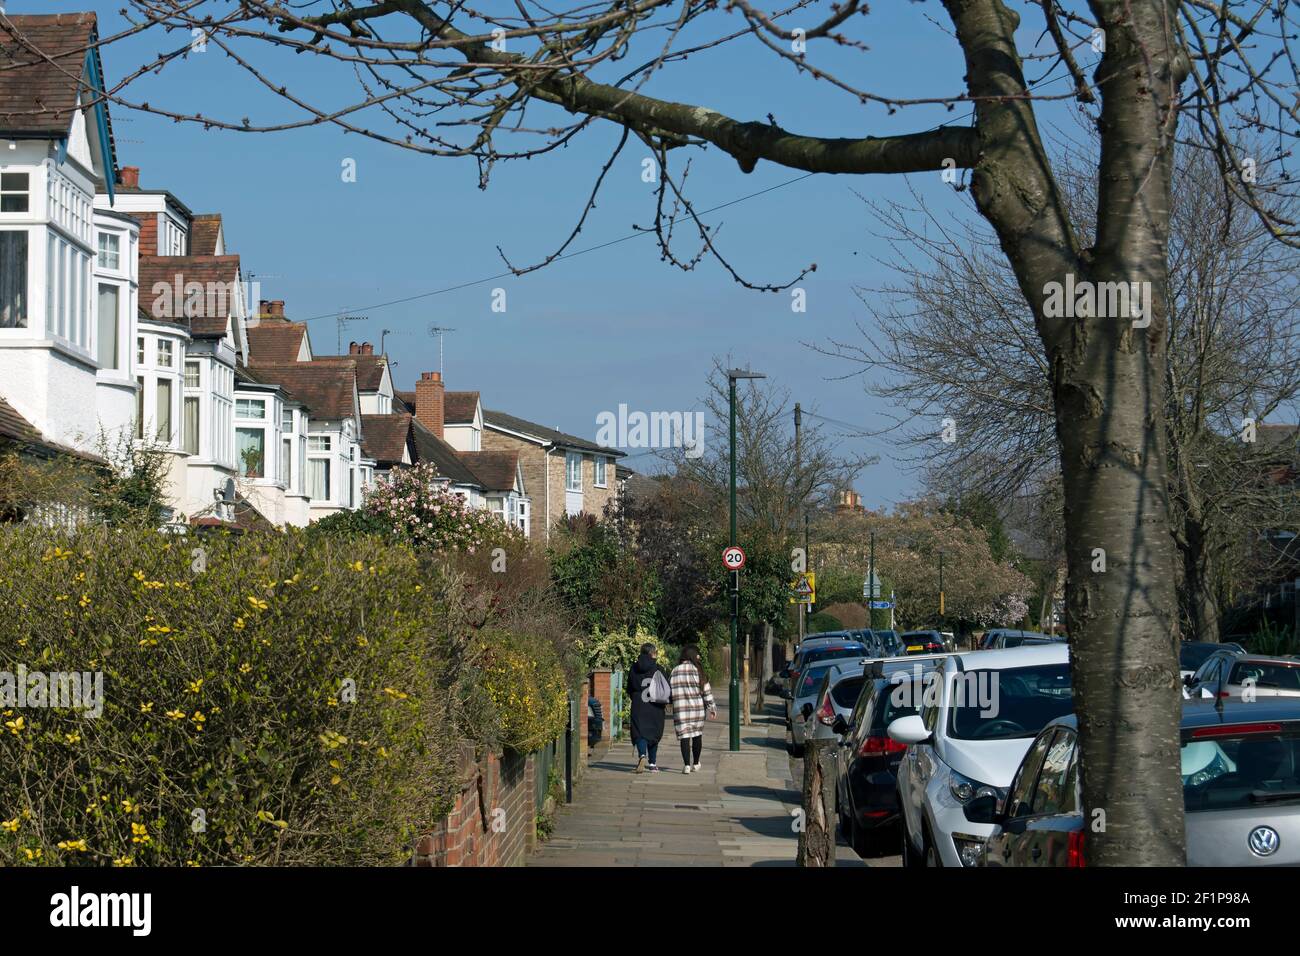 two women walk along a street lined by bay fronted houses and parked cars during early spring in teddington, middlesex, ebngland Stock Photo